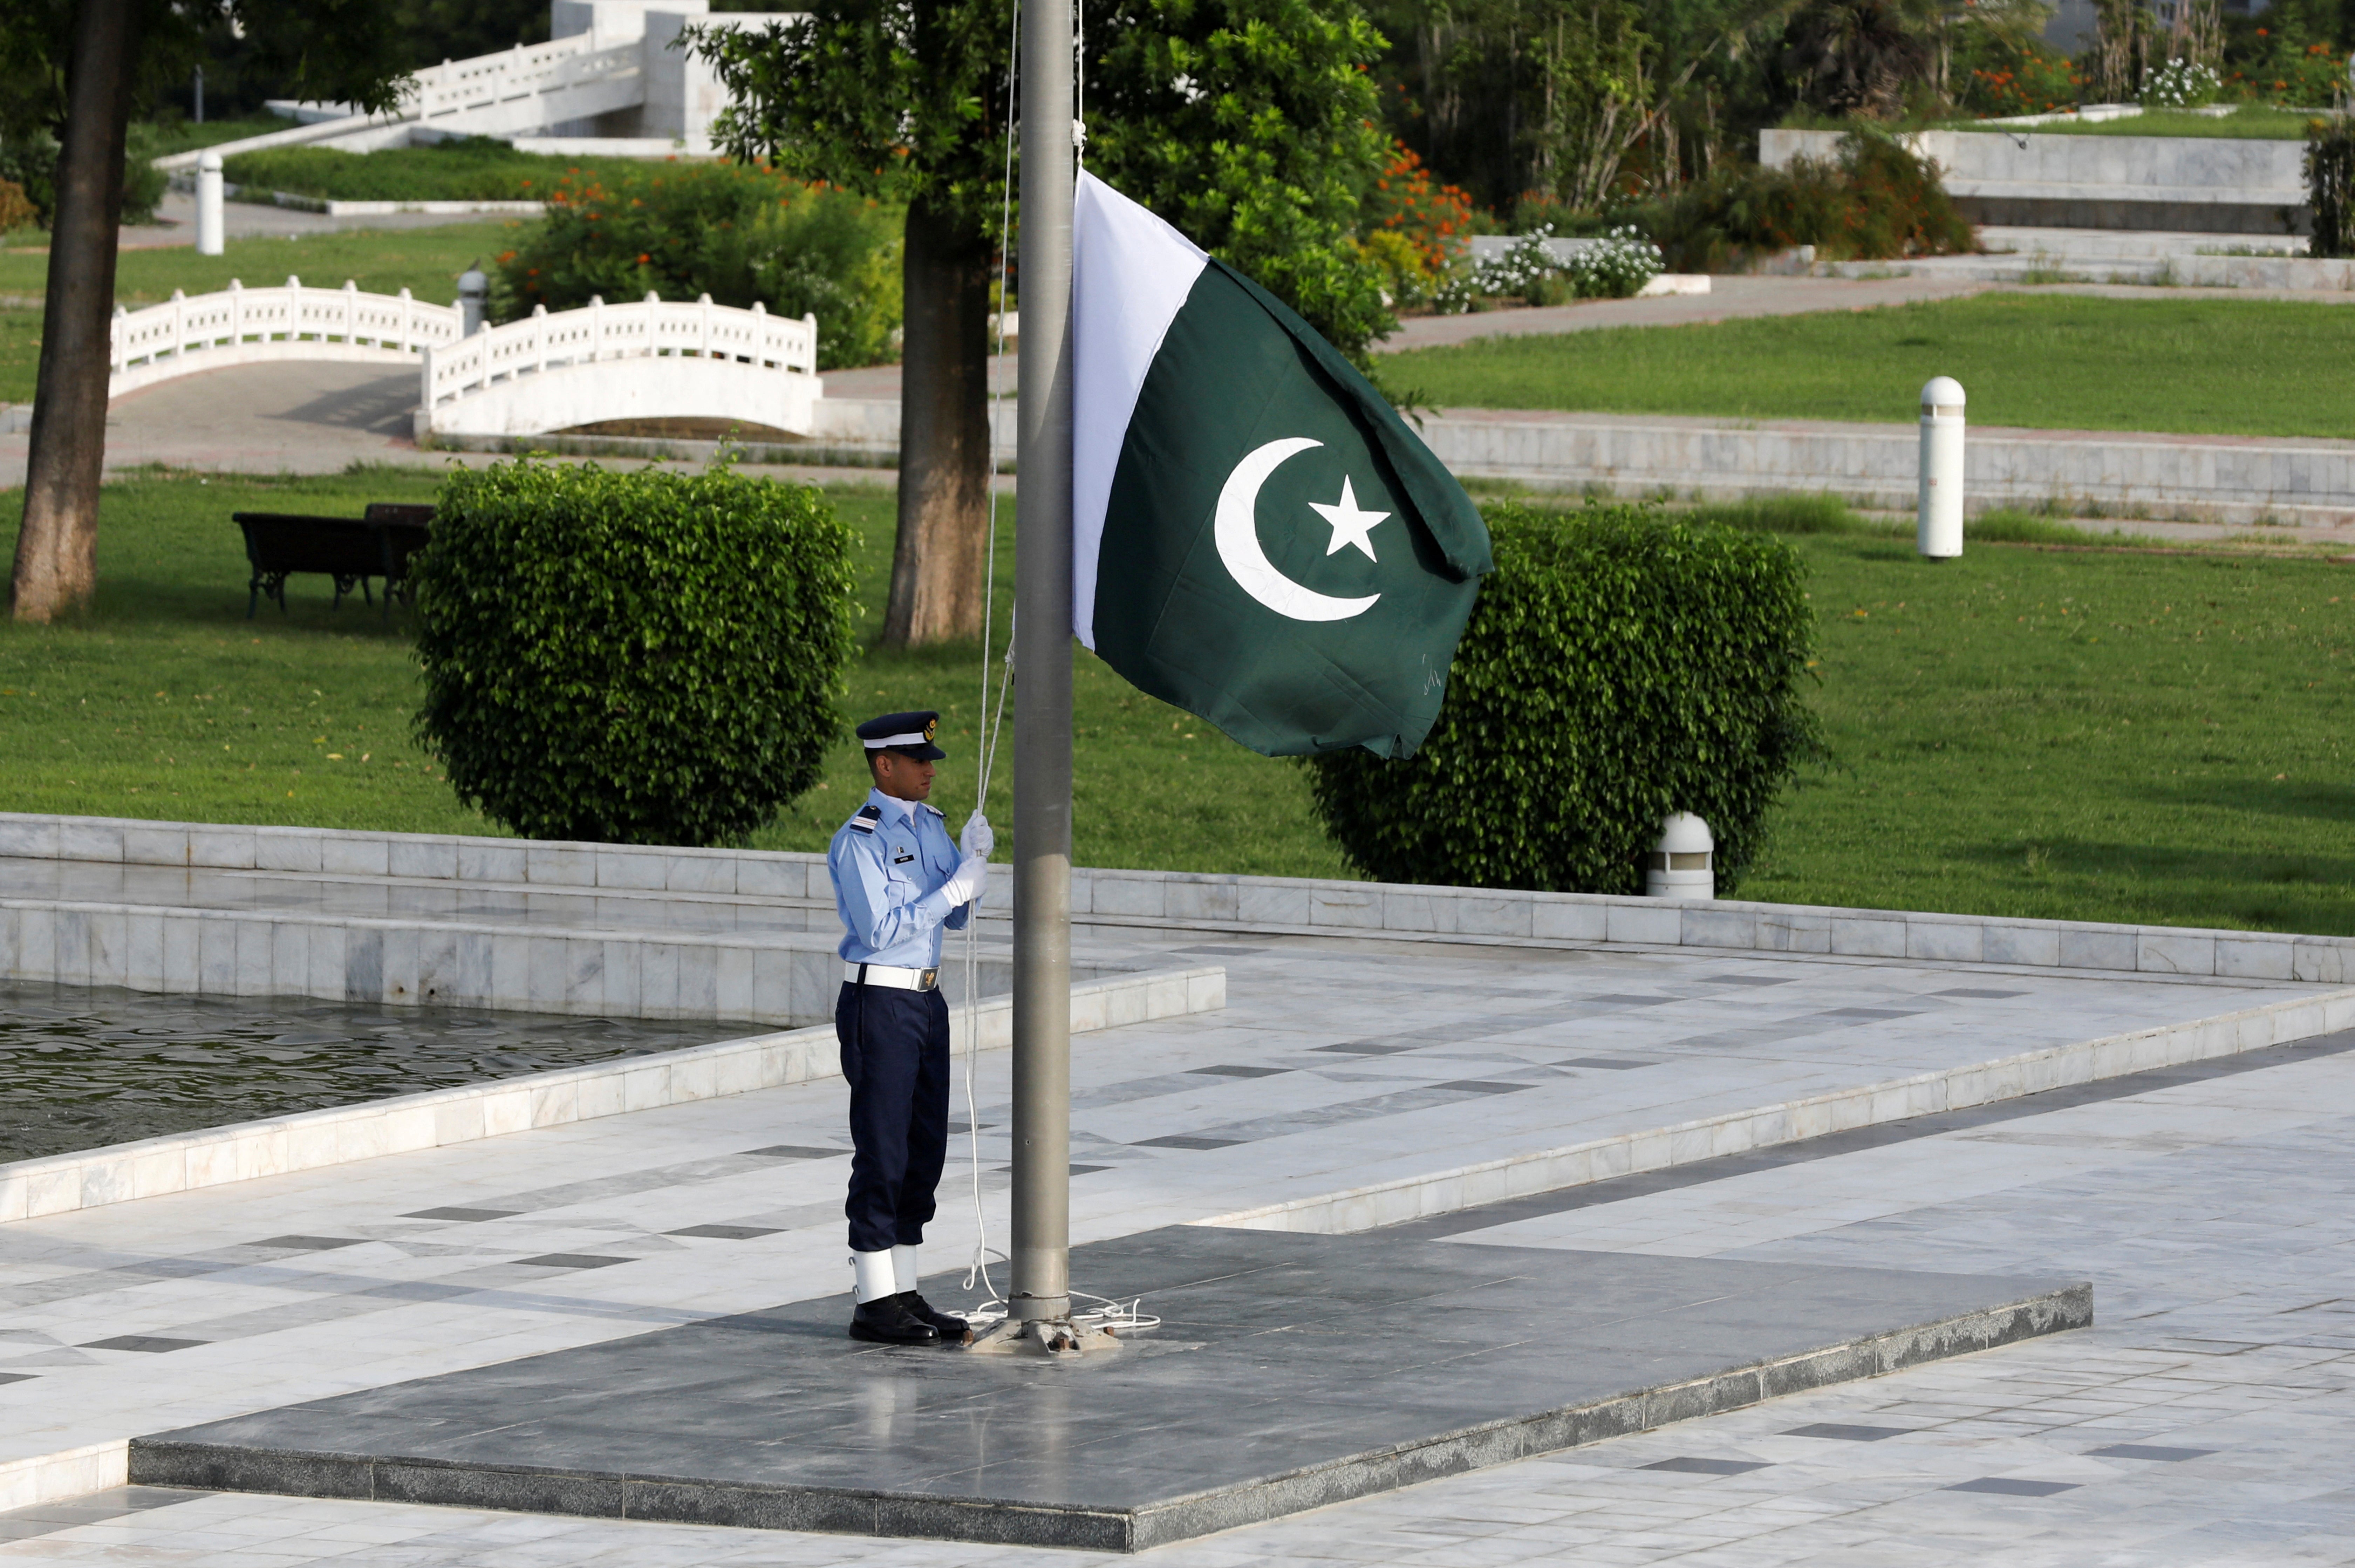 File: Pakistan says India needs to be ‘mindful of the unpleasant consequences of such negligence’ after a projectile was reportedly fired into its territory